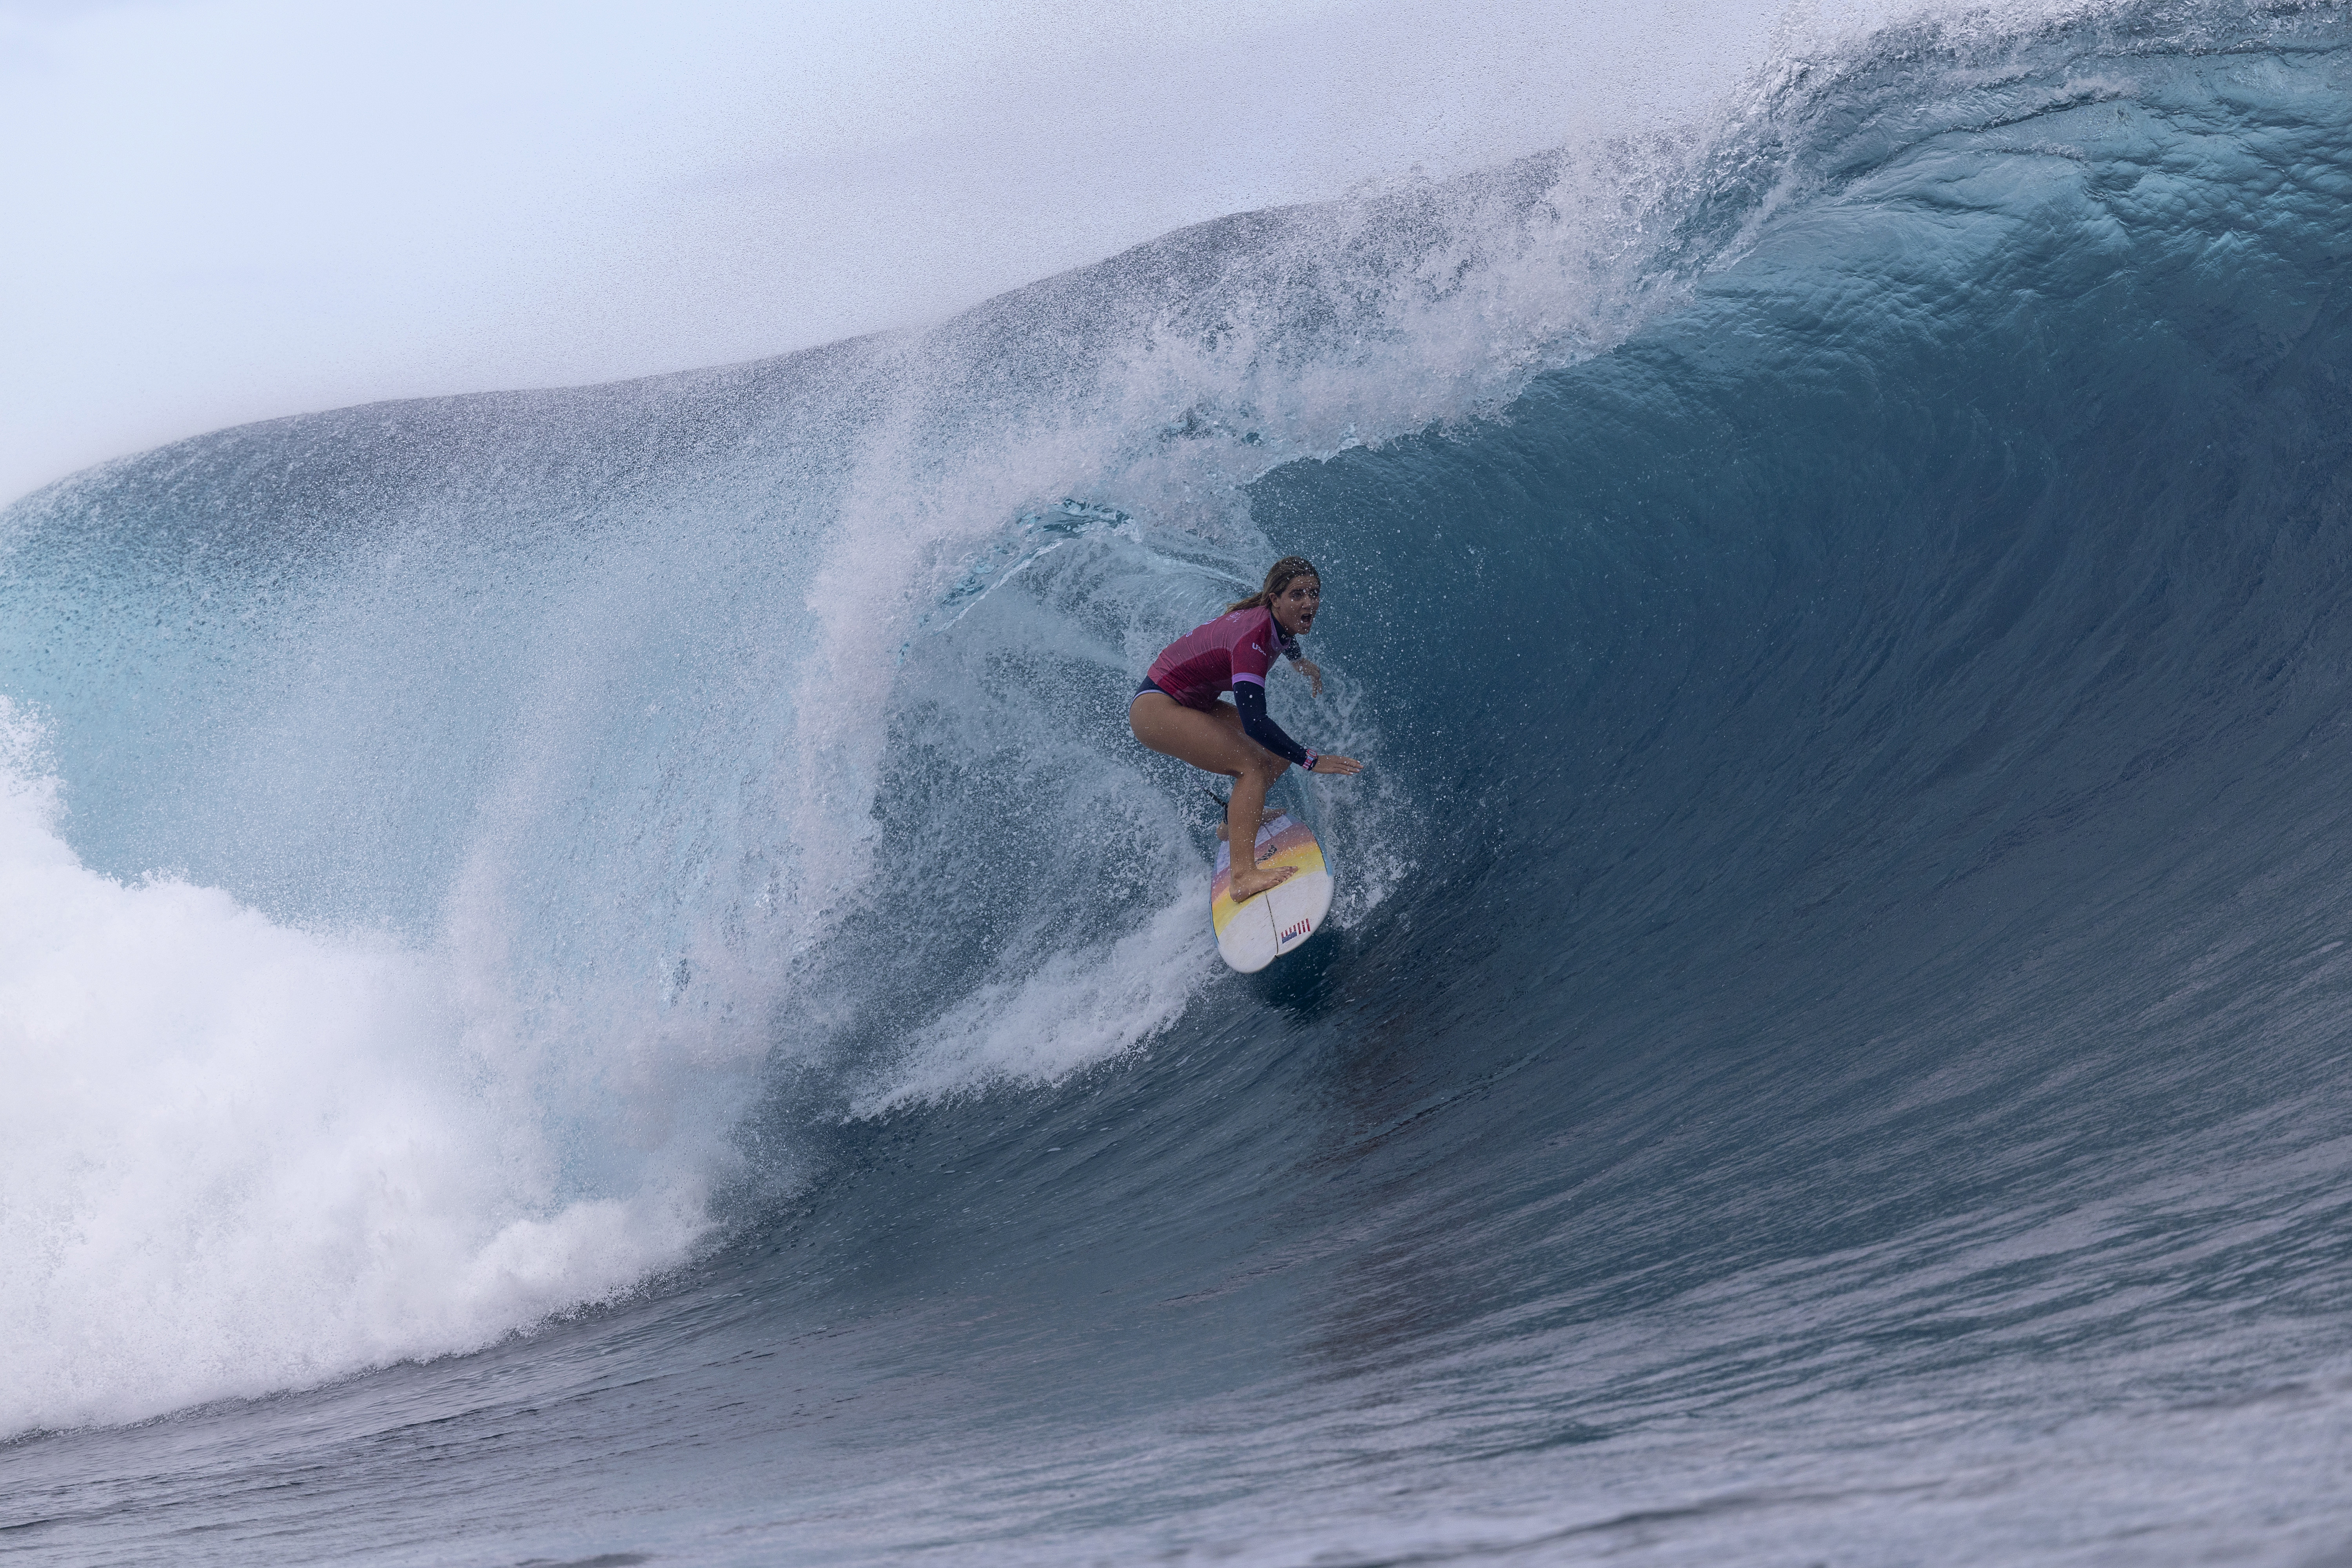 Team USA's Caroline Marks takes gold in women's surfing in the waters off Tahiti